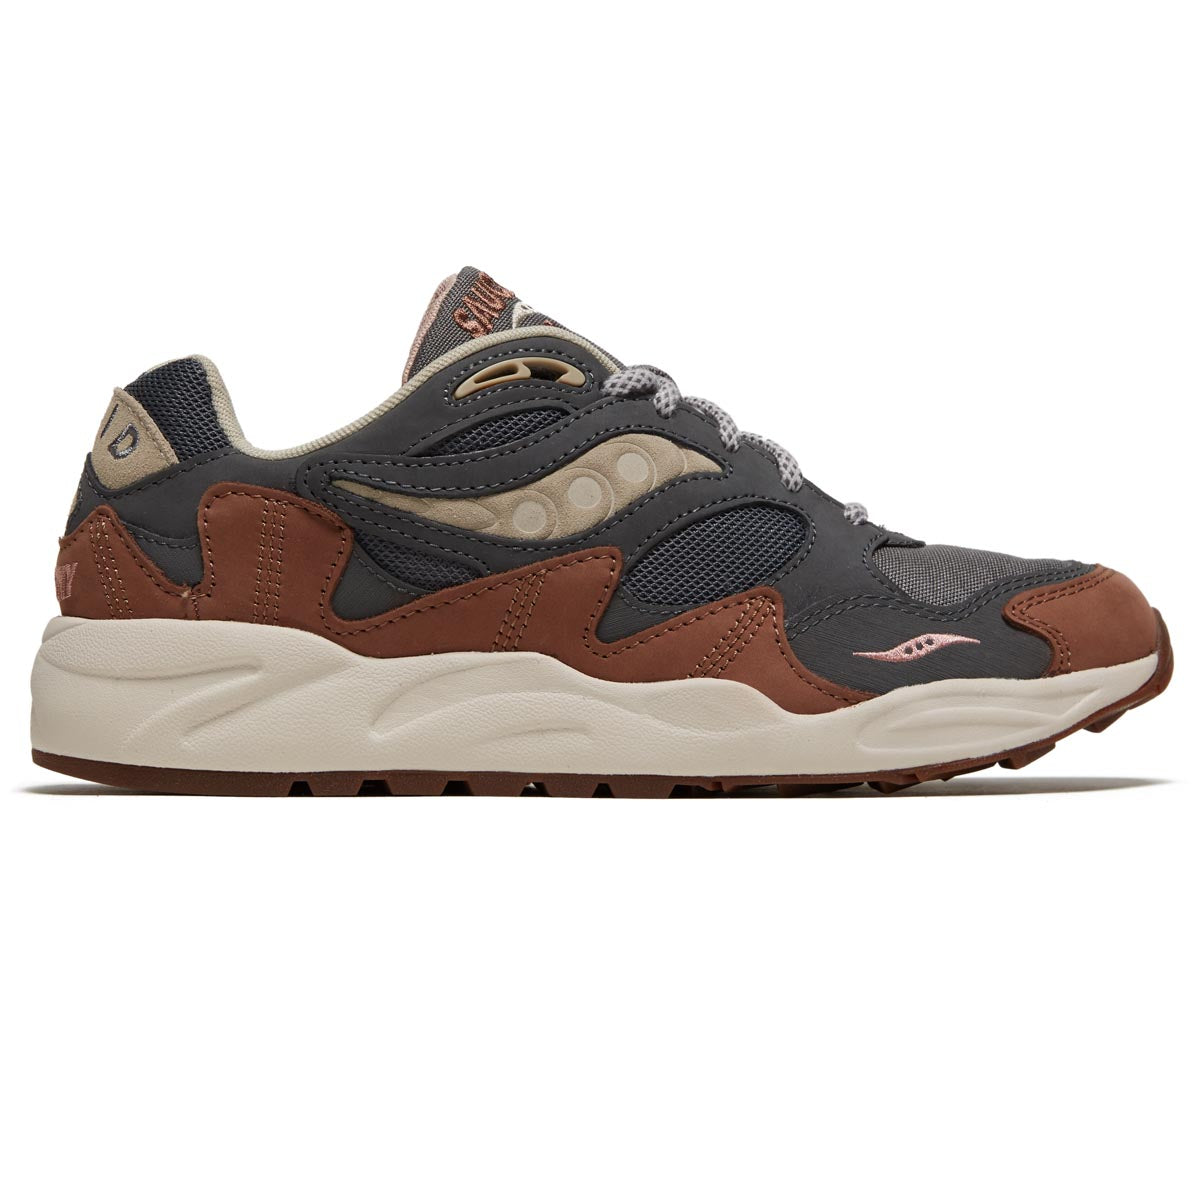 Saucony Grid Shadow 2 Shoes - Grey/Brown image 1